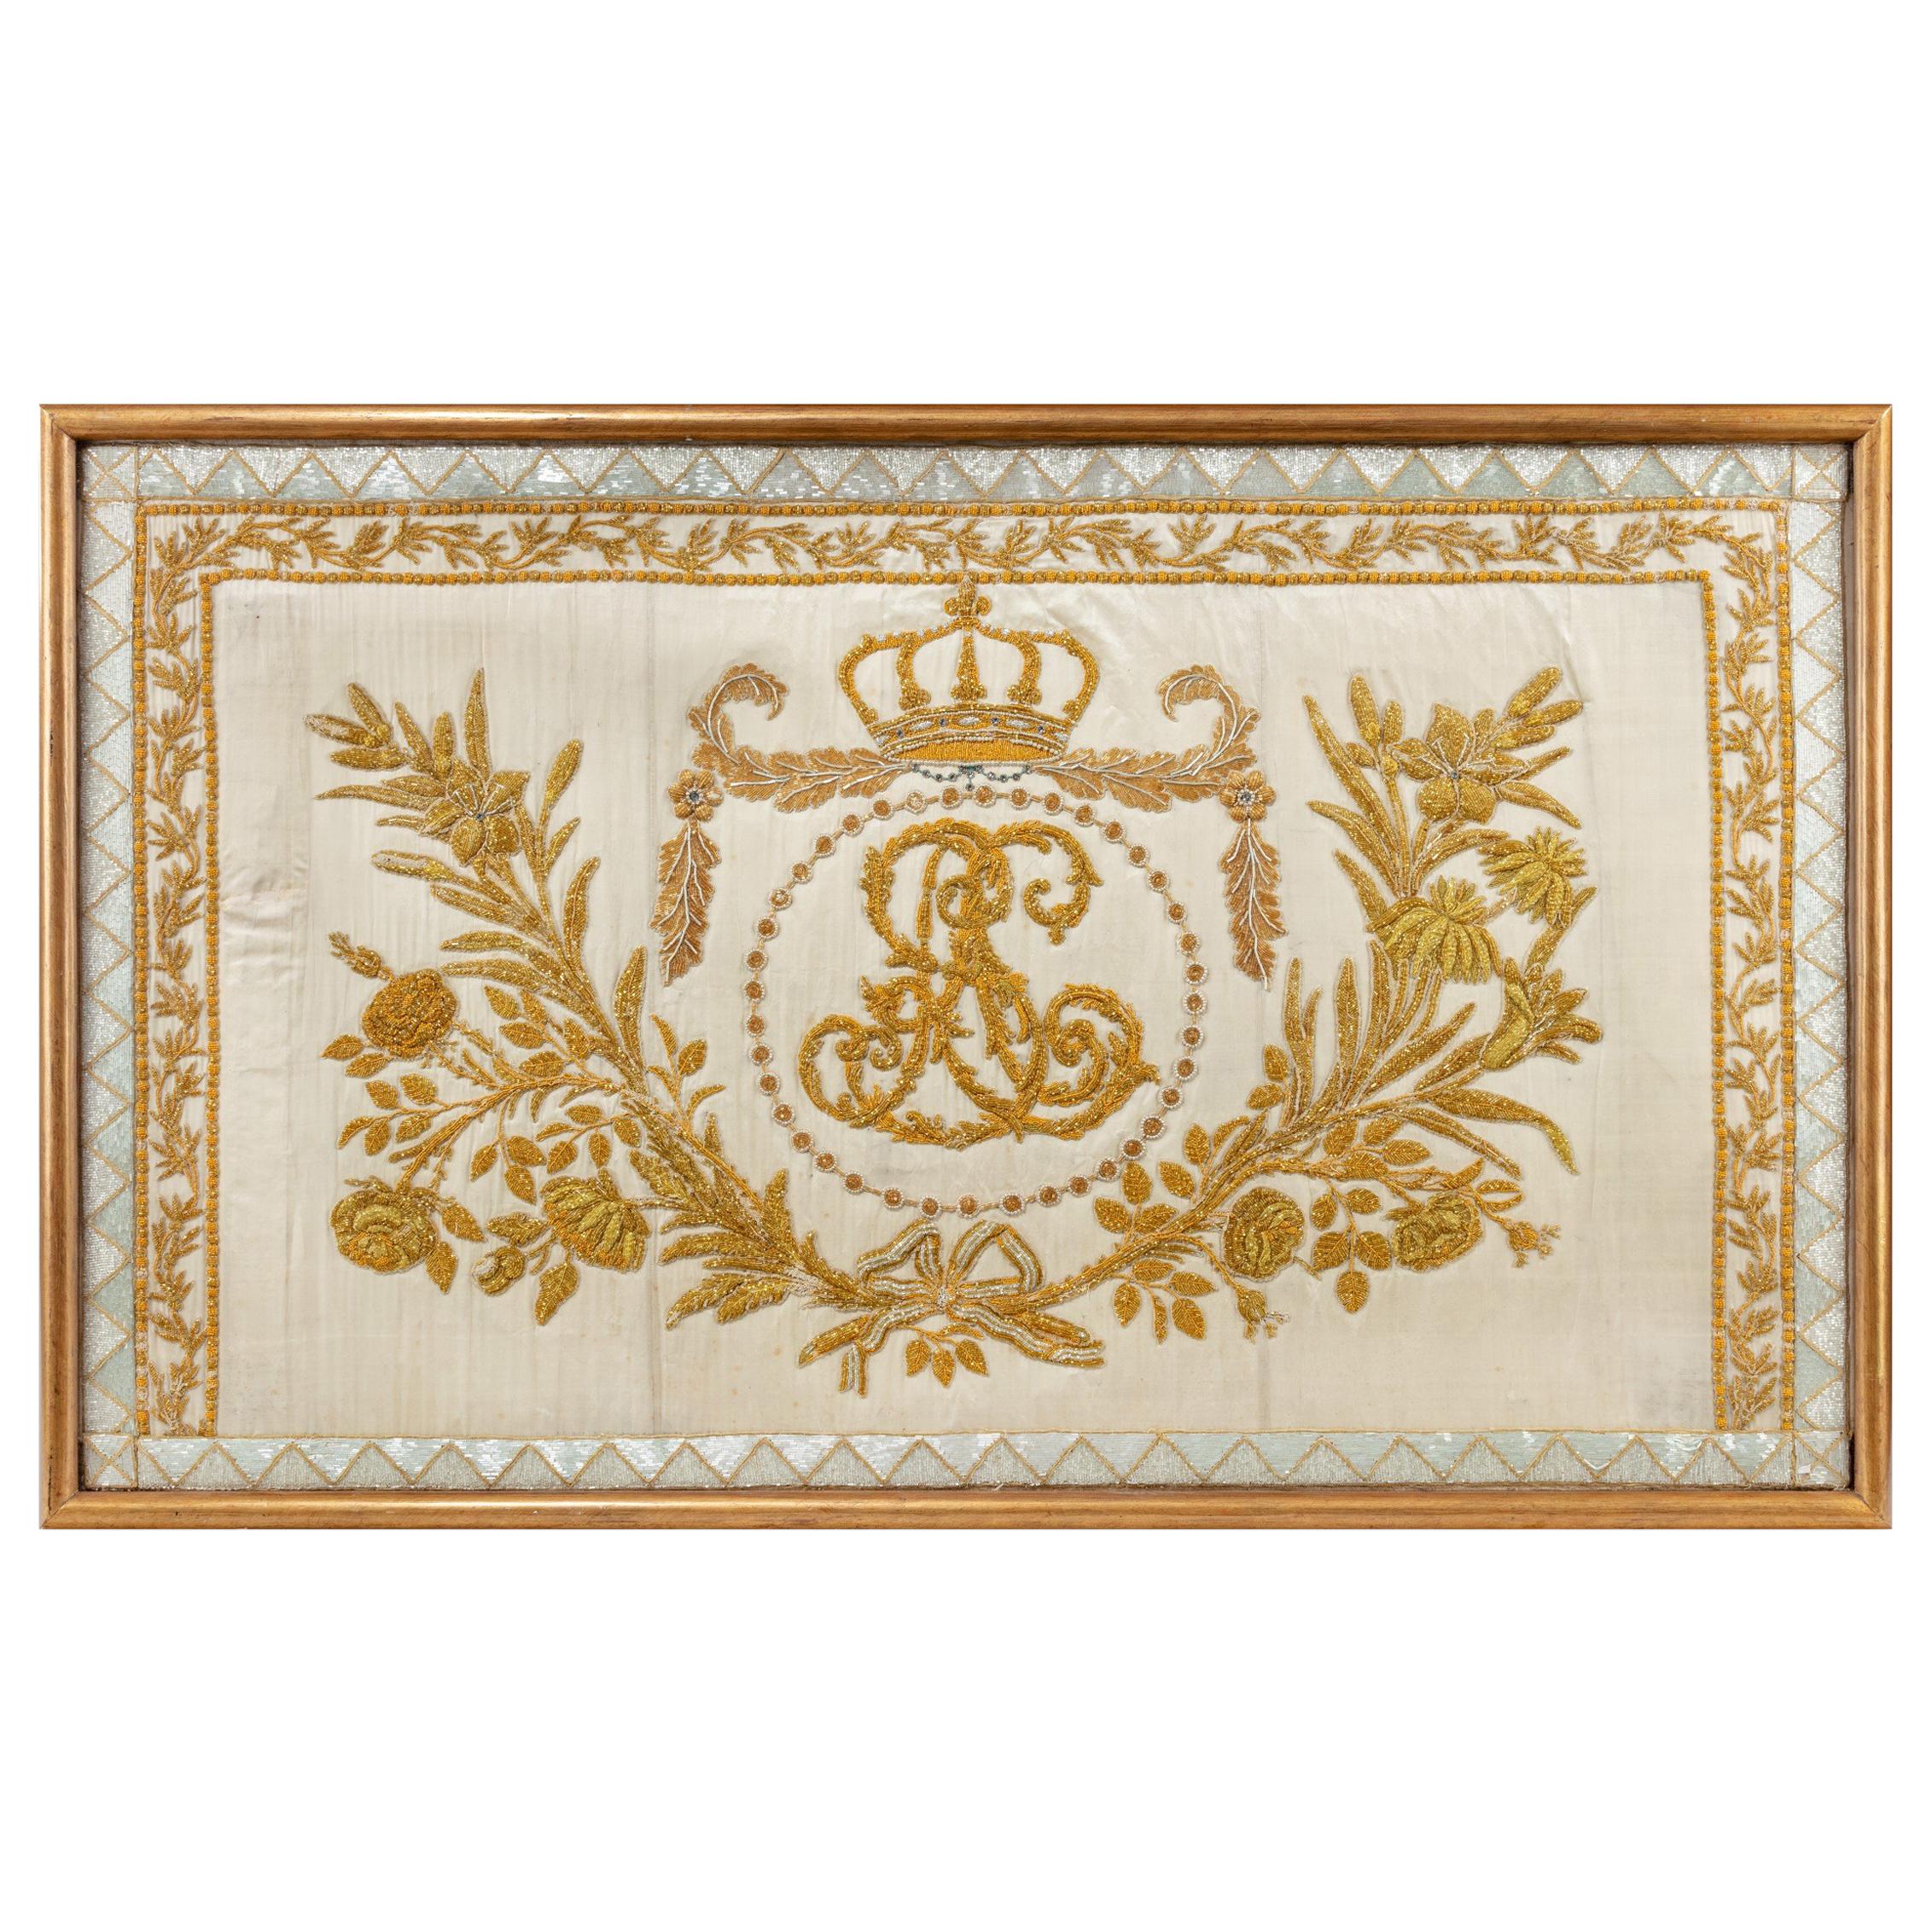 Gold Thread Embroidery of Royal French Interest